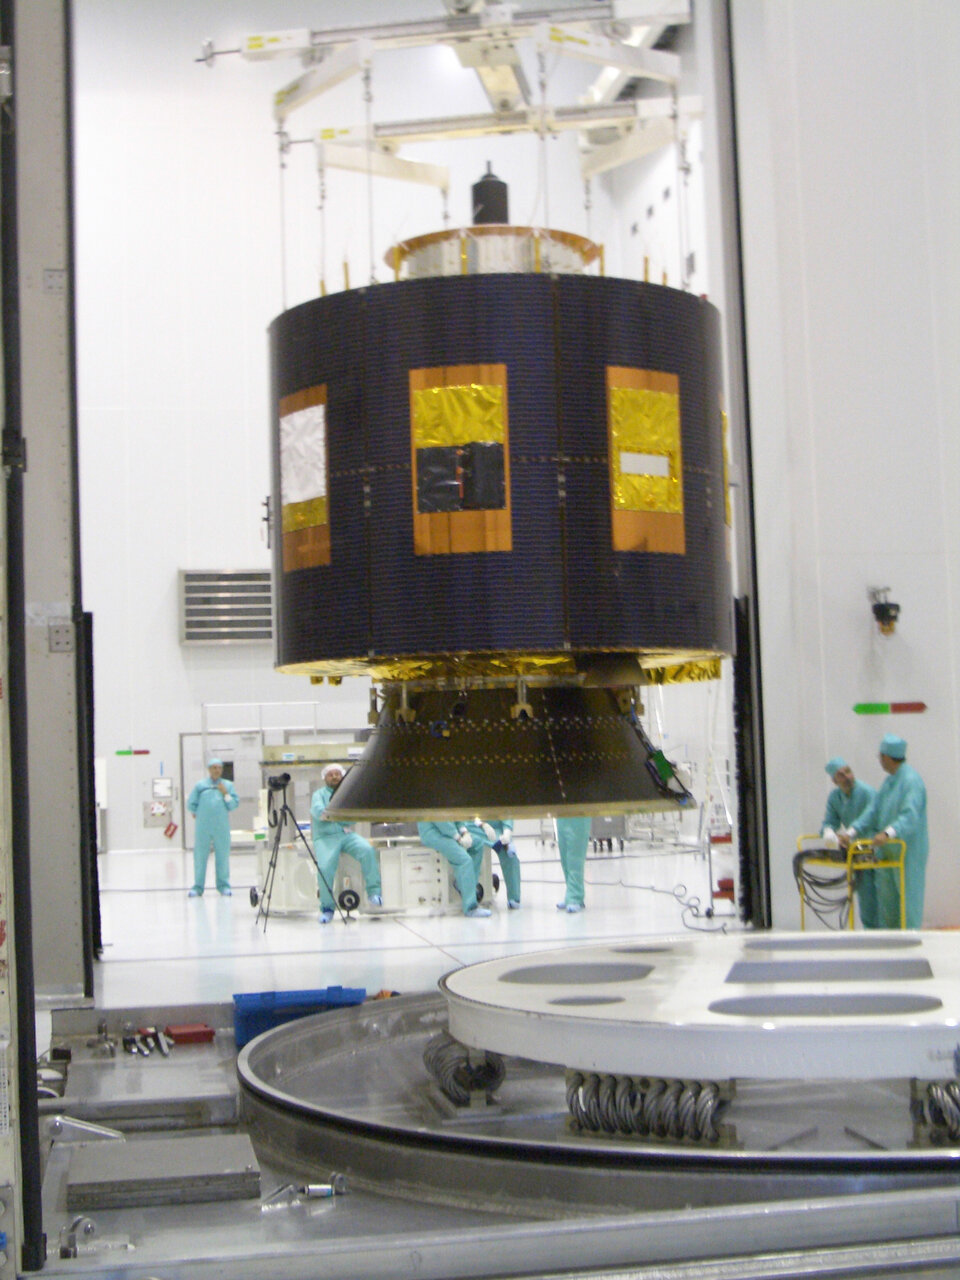 MSG-2 being prepared for launch